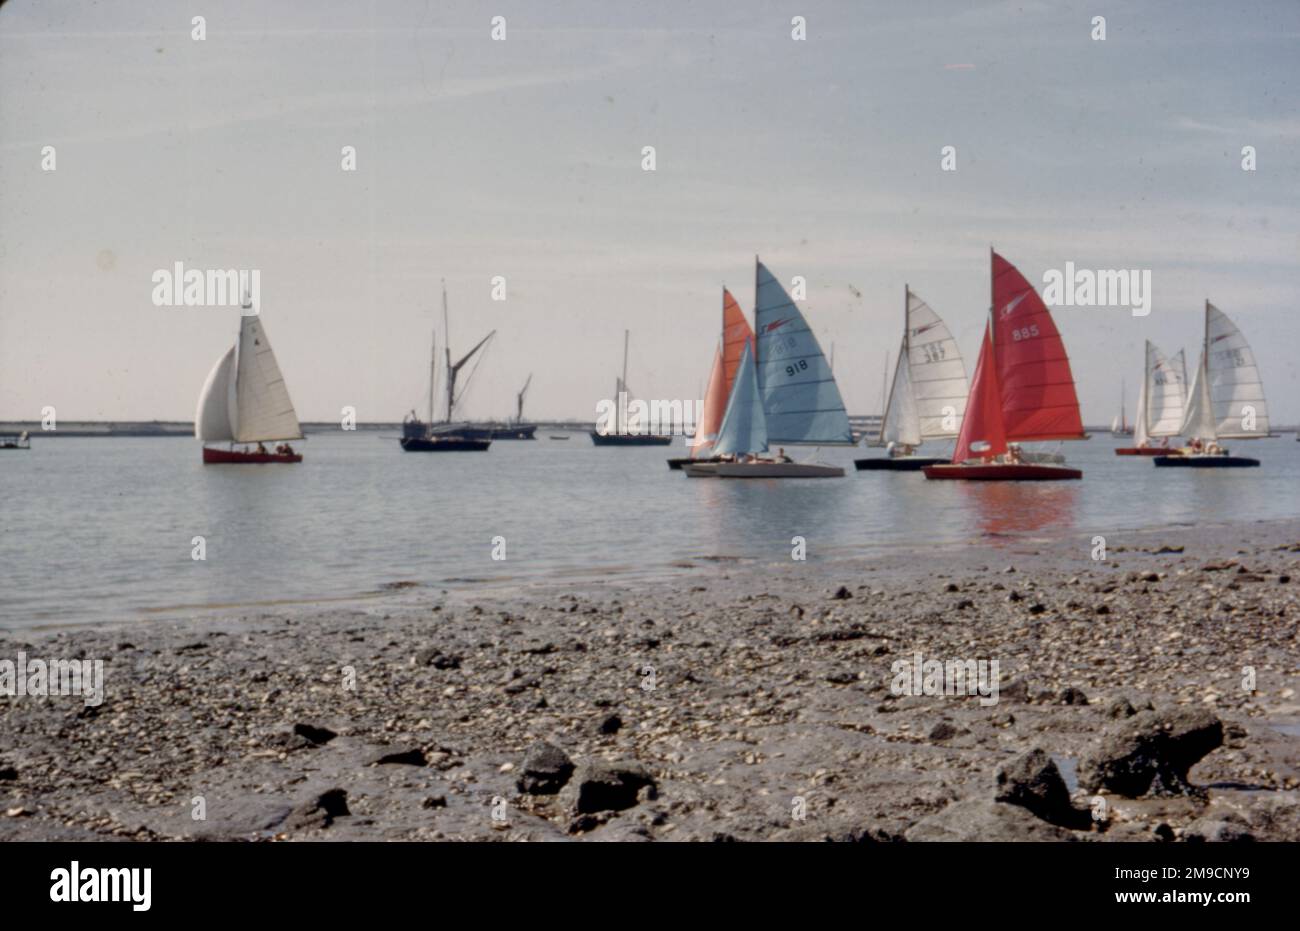 Yachts with different coloured sails at Burnham on Crouch, Essex. Stock Photo